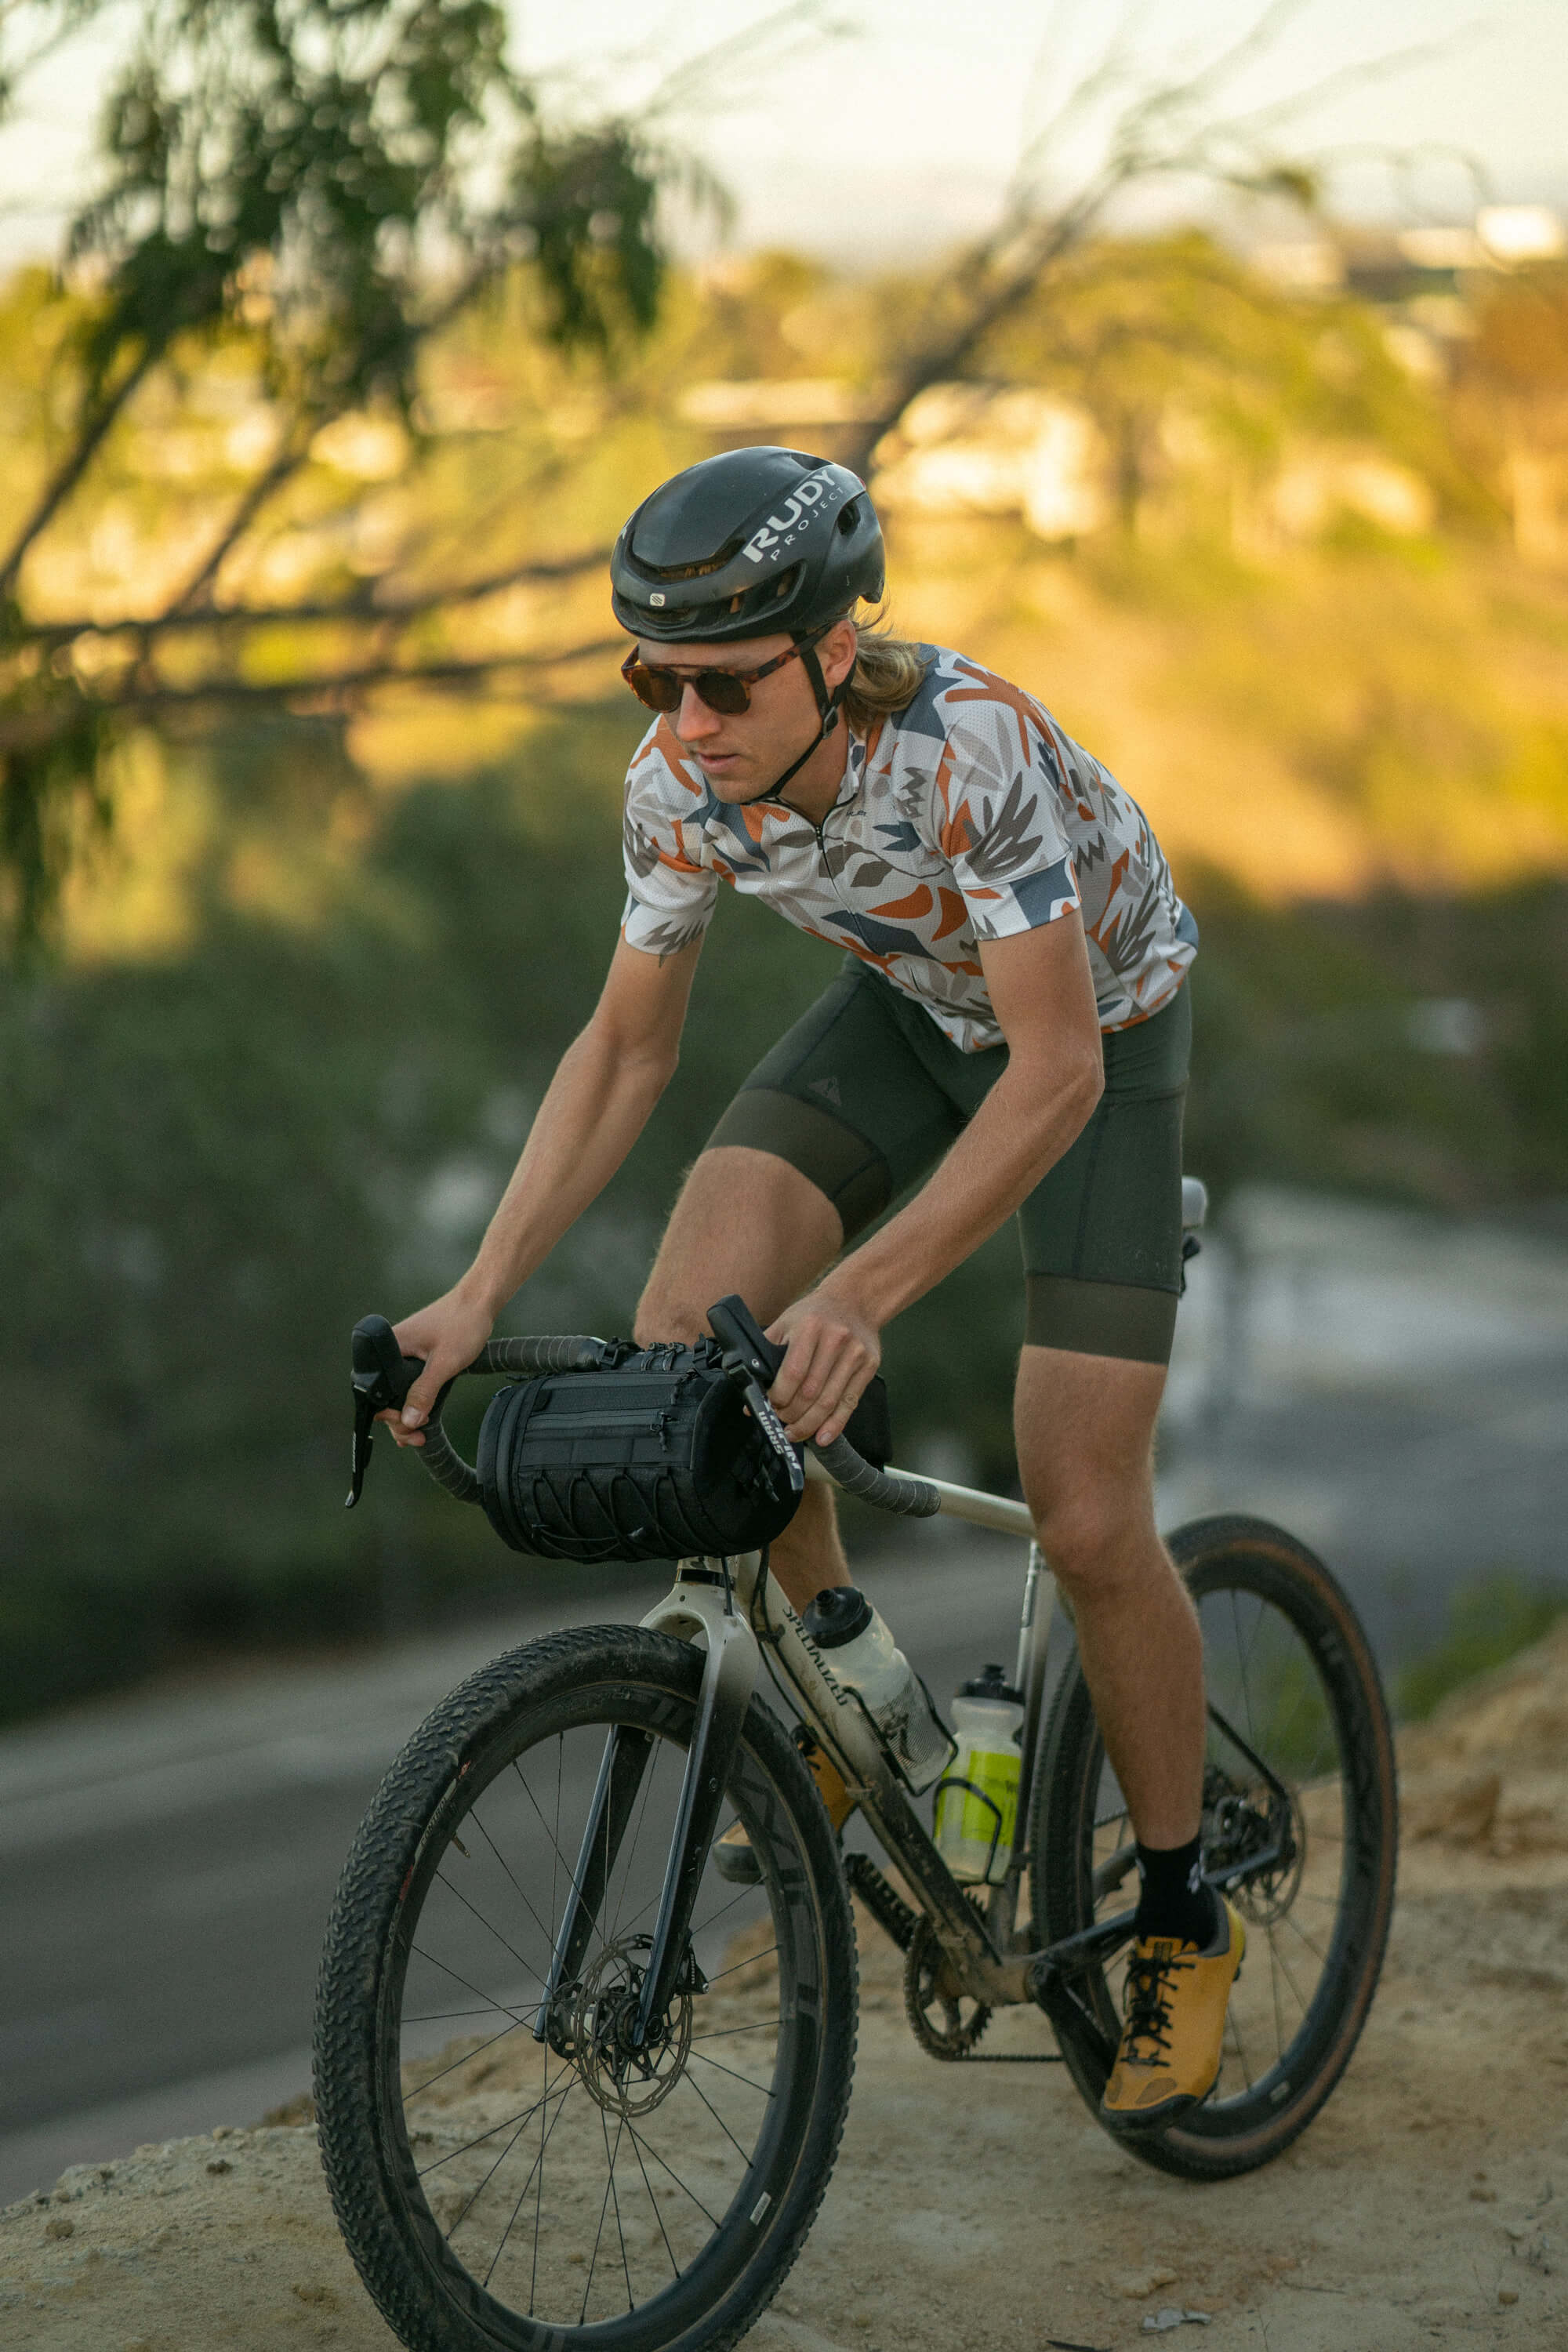 Orucase - Premium Cycling Bags and Cases for Cyclists